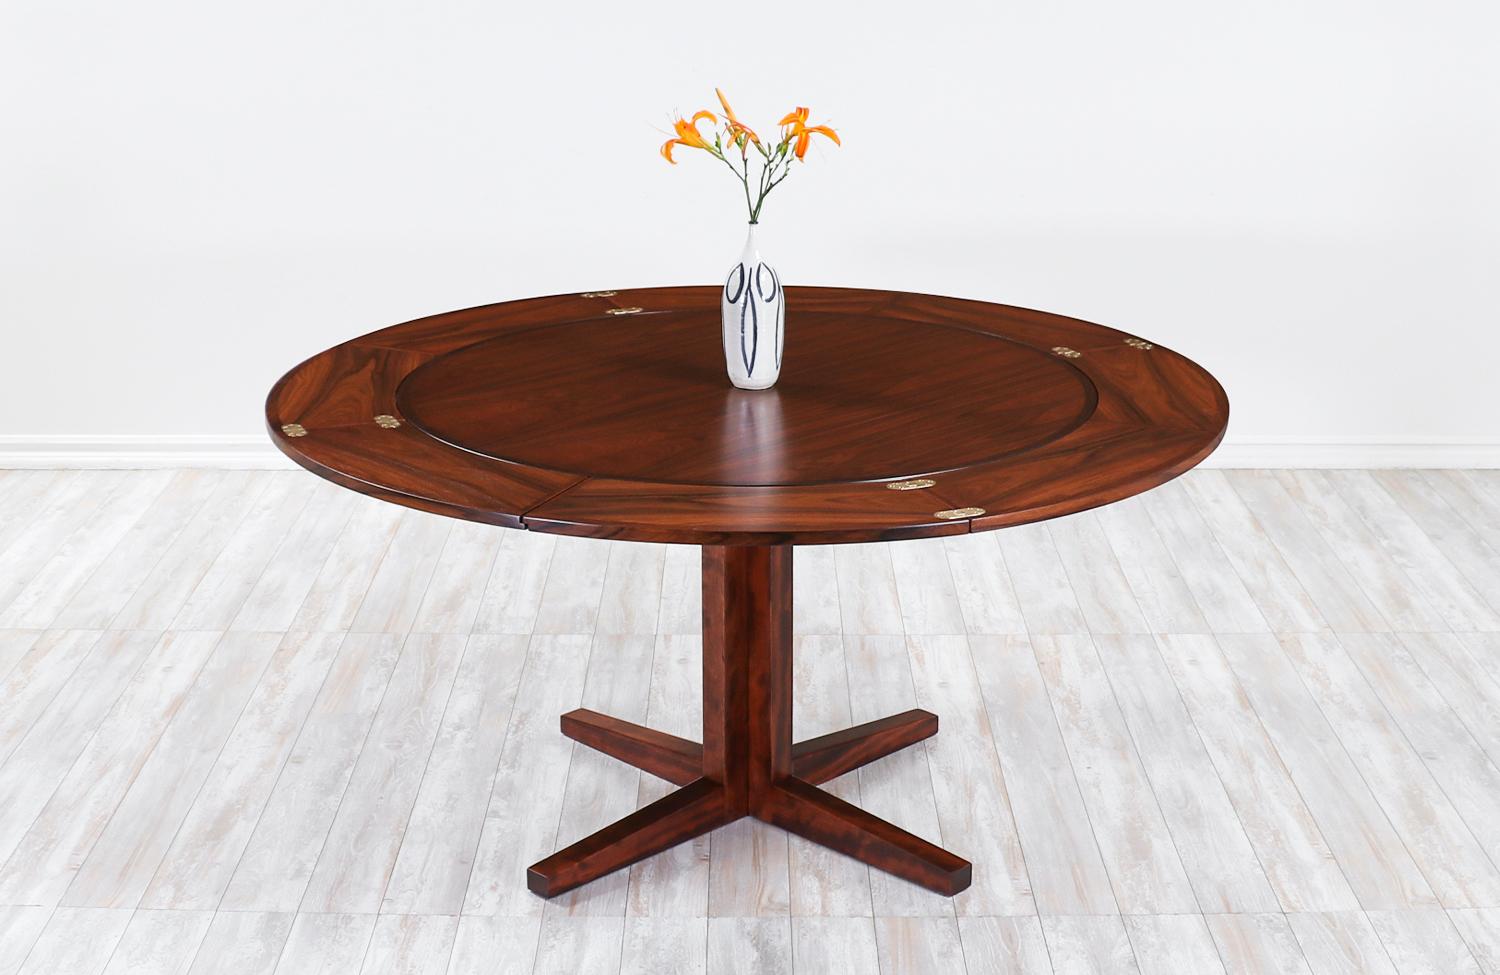 Danish modern “Flip-Flap” rosewood dining table by Dyrlund


Dimensions:
29in H x 43.25in - 59in W
Expands up to 59in.